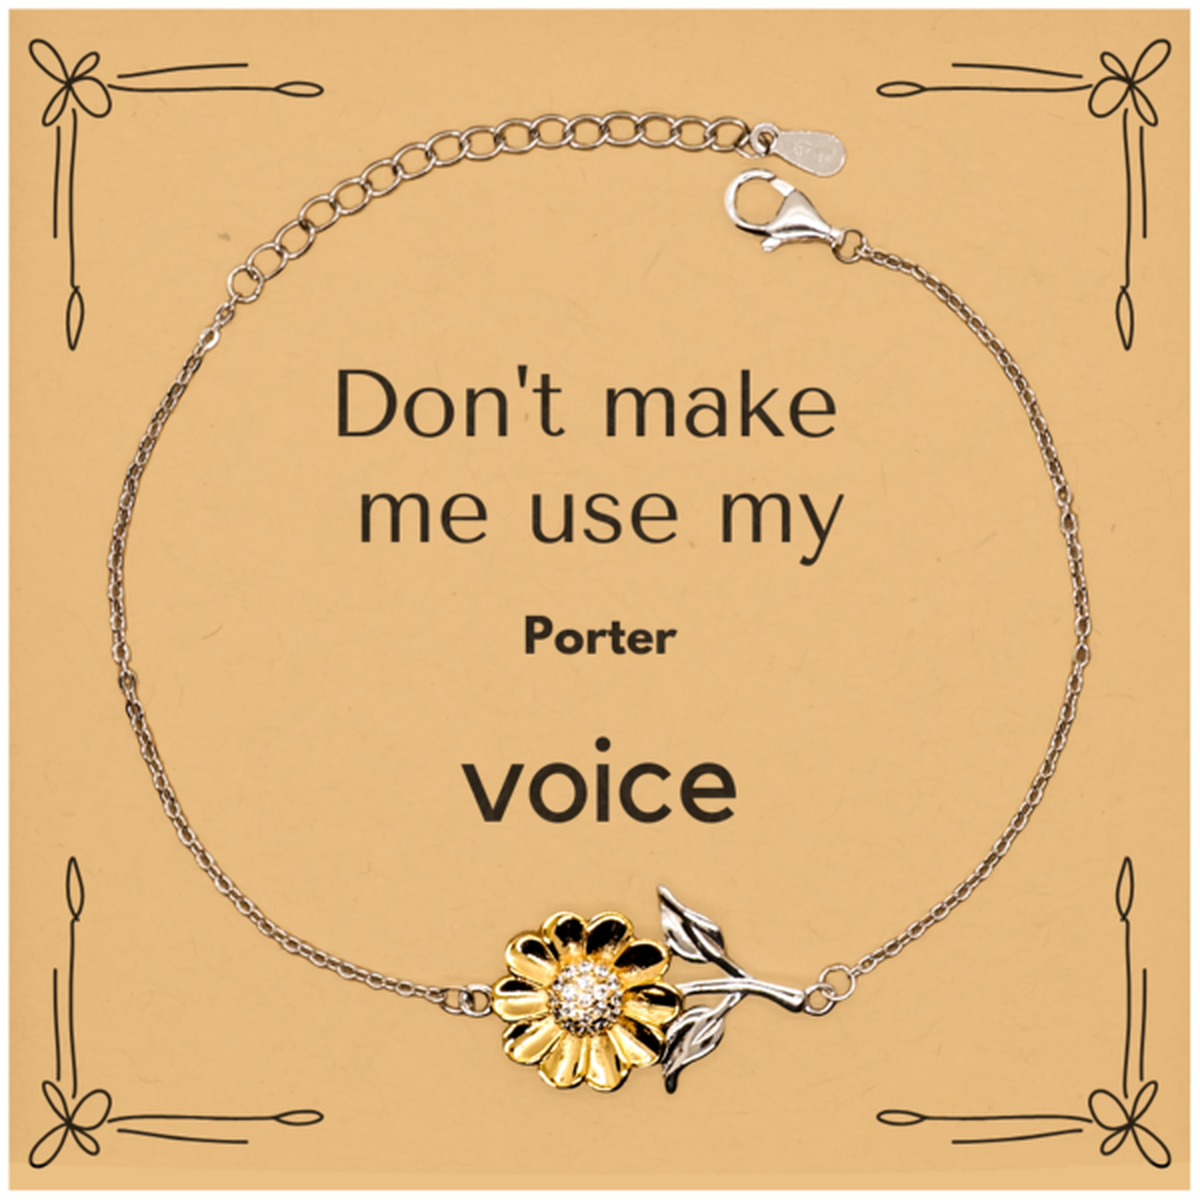 Don't make me use my Porter voice, Sarcasm Porter Card Gifts, Christmas Porter Sunflower Bracelet Birthday Unique Gifts For Porter Coworkers, Men, Women, Colleague, Friends